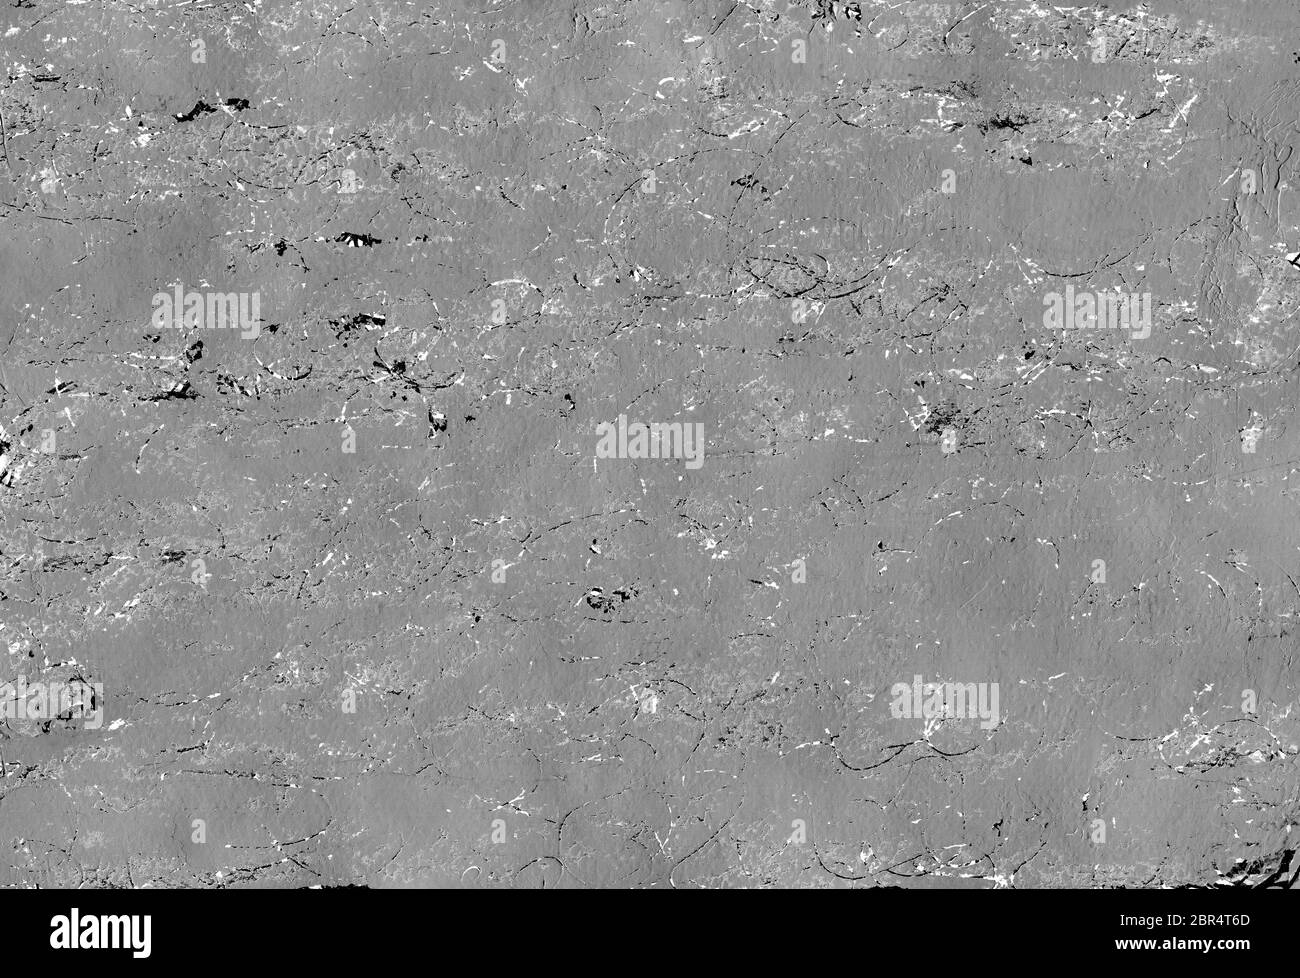 Monochrome abstract grunge background. Texture with scratches, dots ...